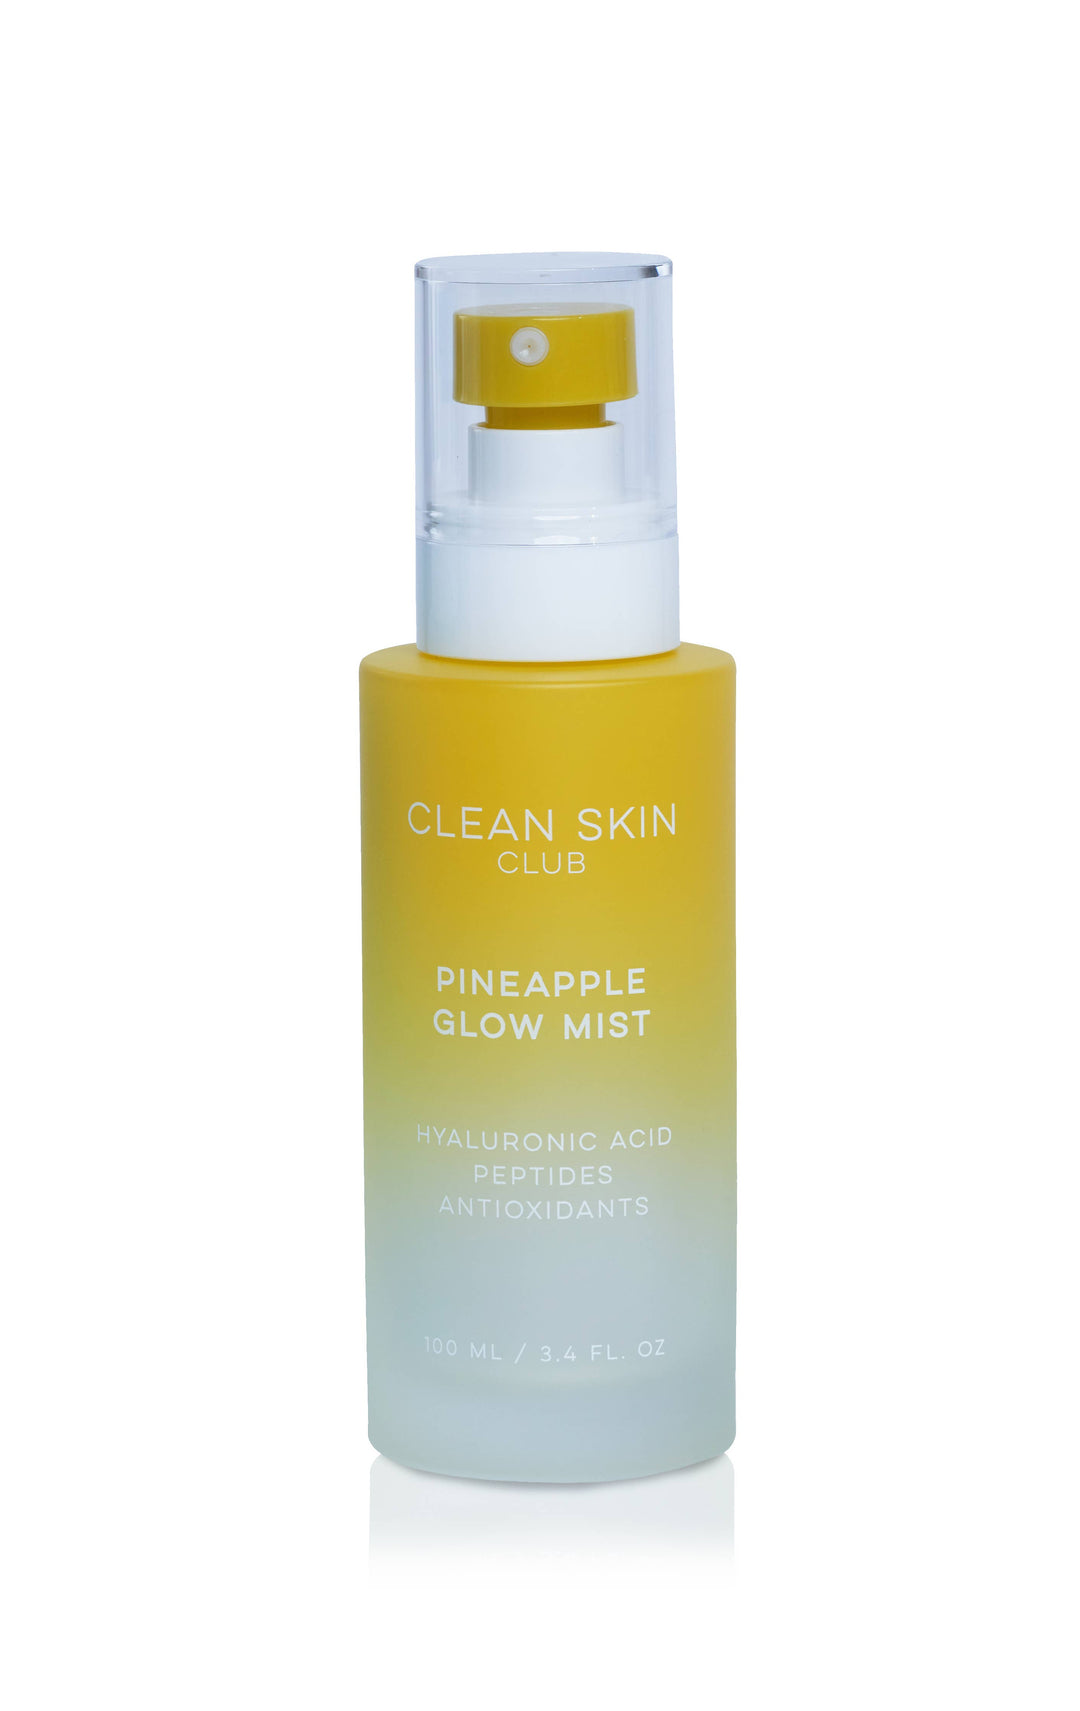 Experience Radiant Skin with Clean Skin Club's Pineapple Glow Mist